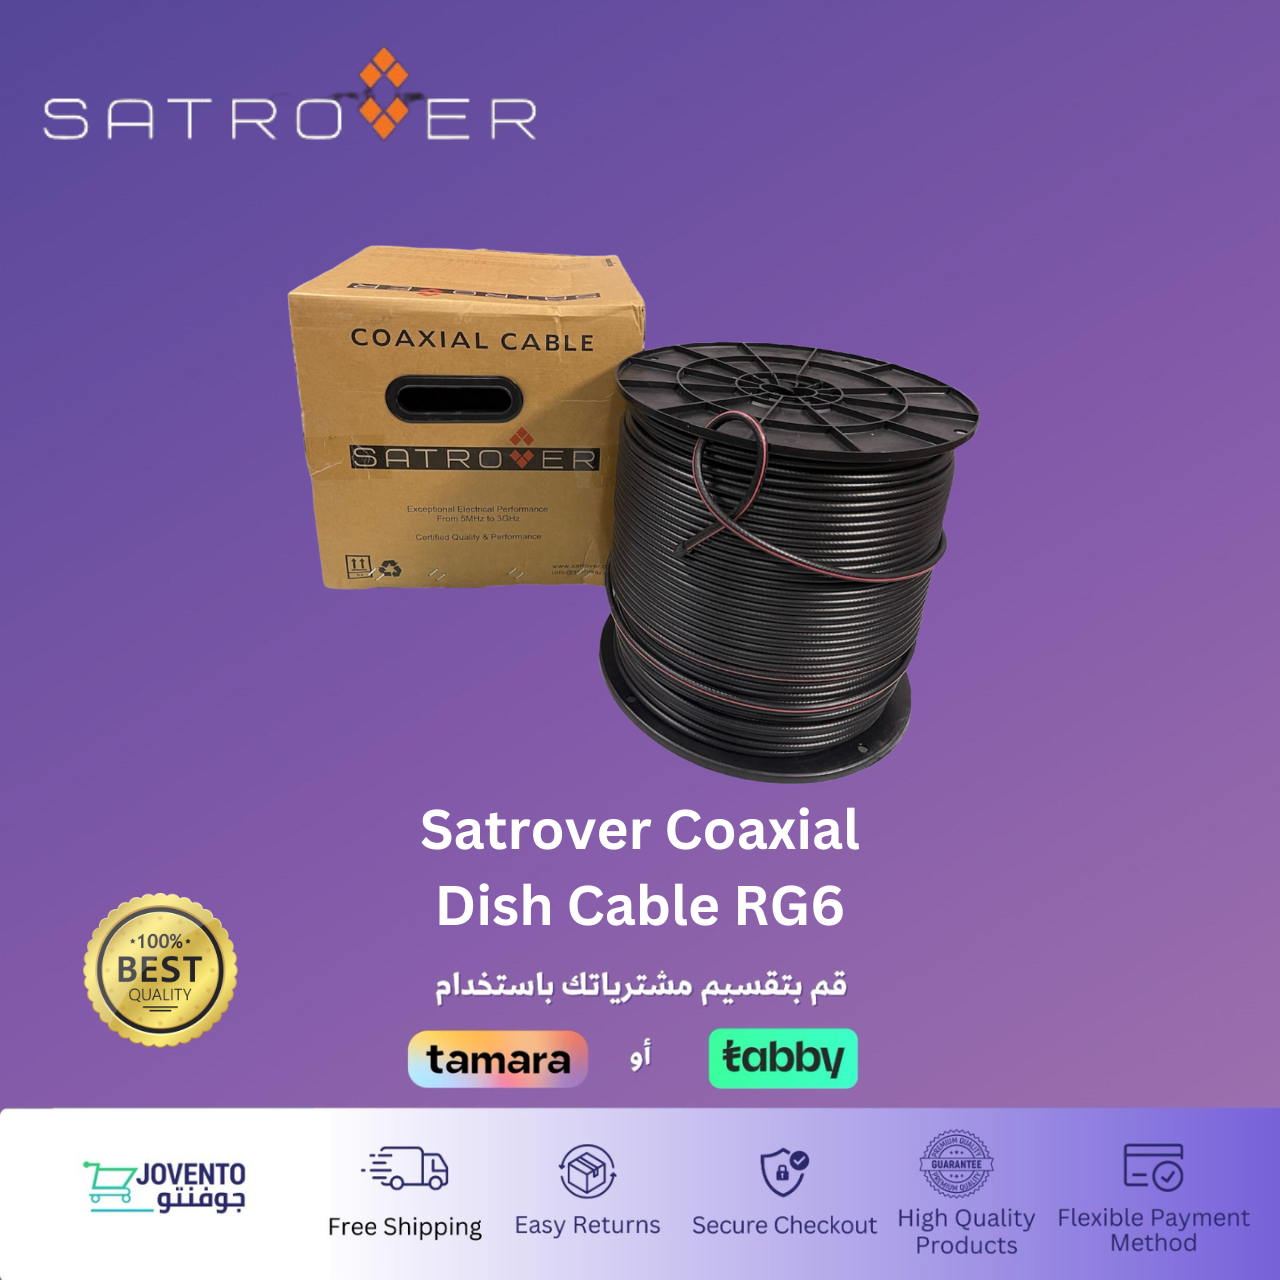 SATROVER Coaxial Cable RG6 Dish Certified Quality 305M